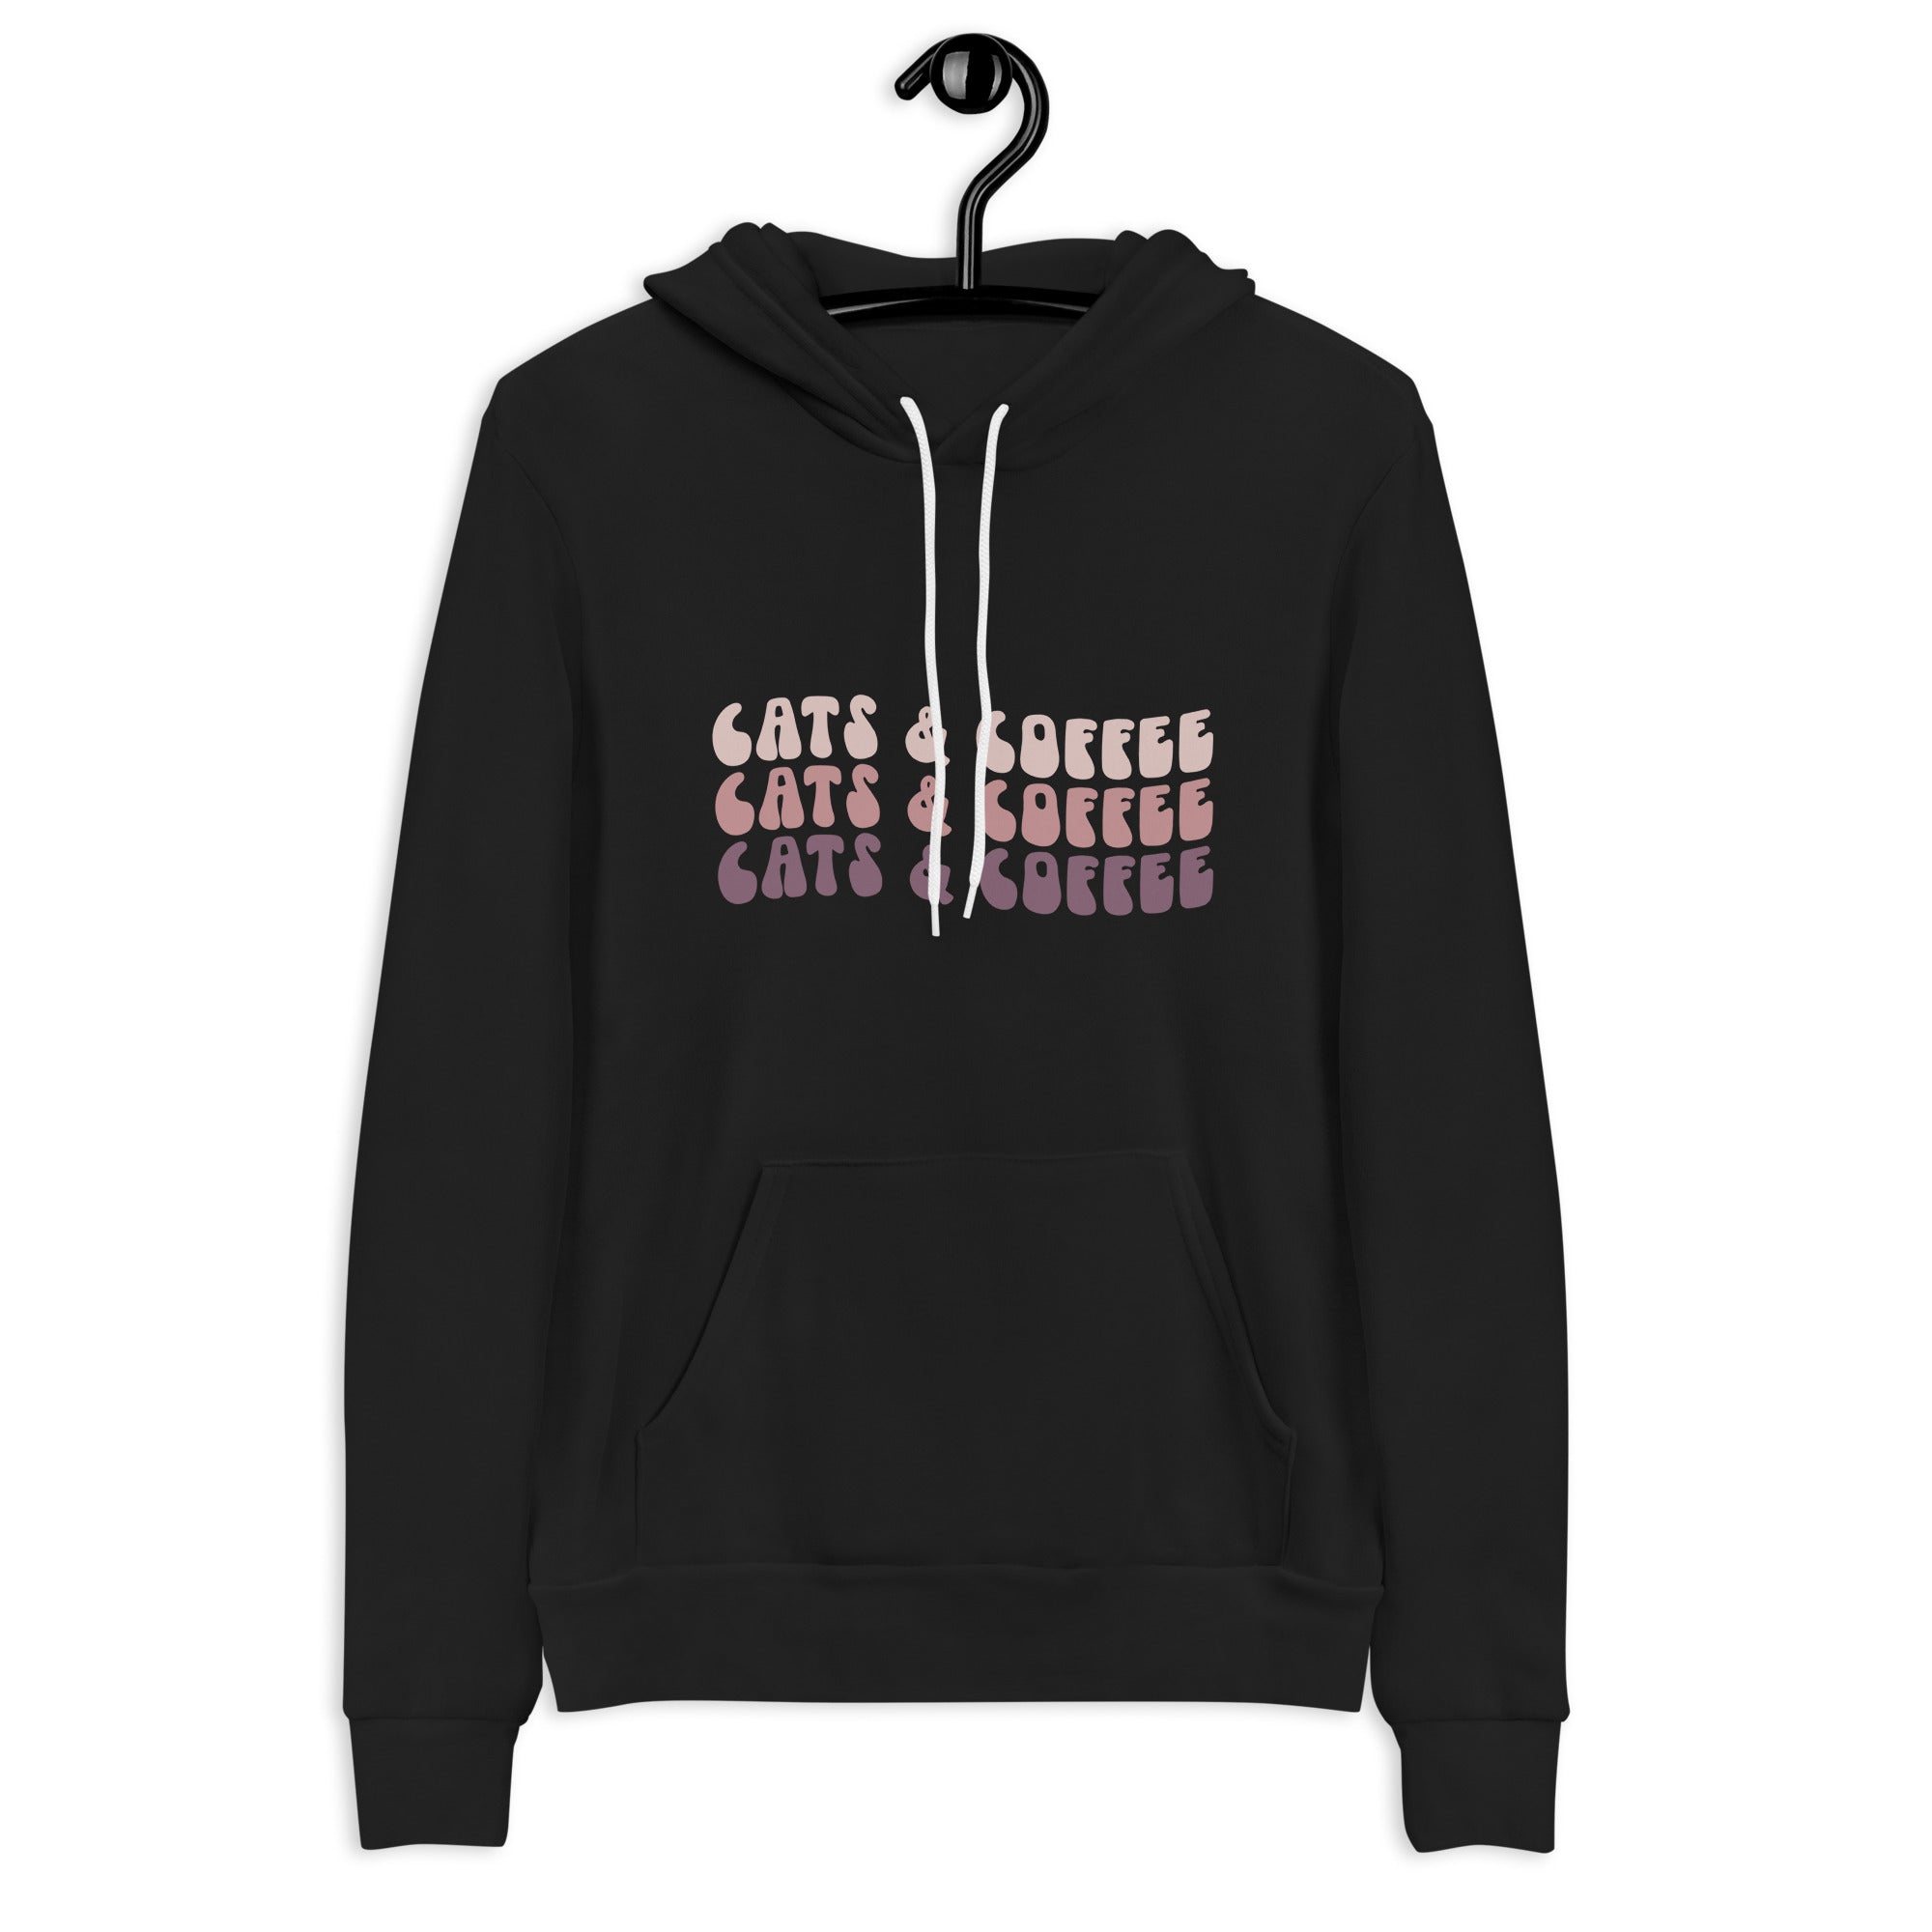 Lucky Cat Café & Lounge - Hoodies and sweatshirts are purrfect for a cold,  rainy Louisville day like today! Last Call ~ ONE OF EACH SIZE LEFT. Each  purchase helps us take